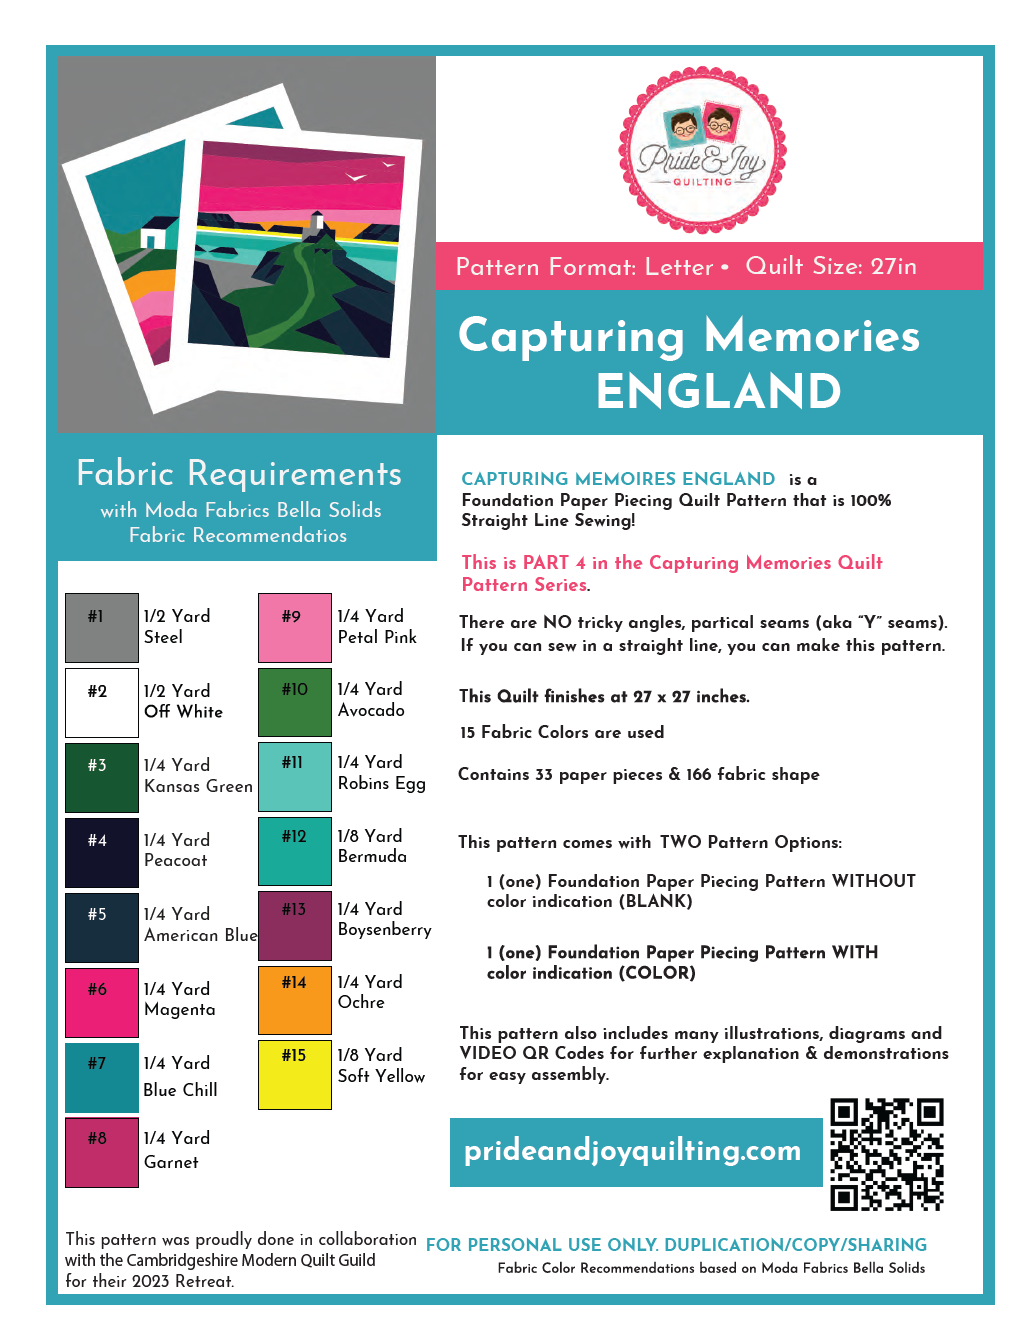 PDF (Part 4 of 9) Capturing Memories in ENGLAND. A Foundation Paper Piecing Quilt Pattern Series.